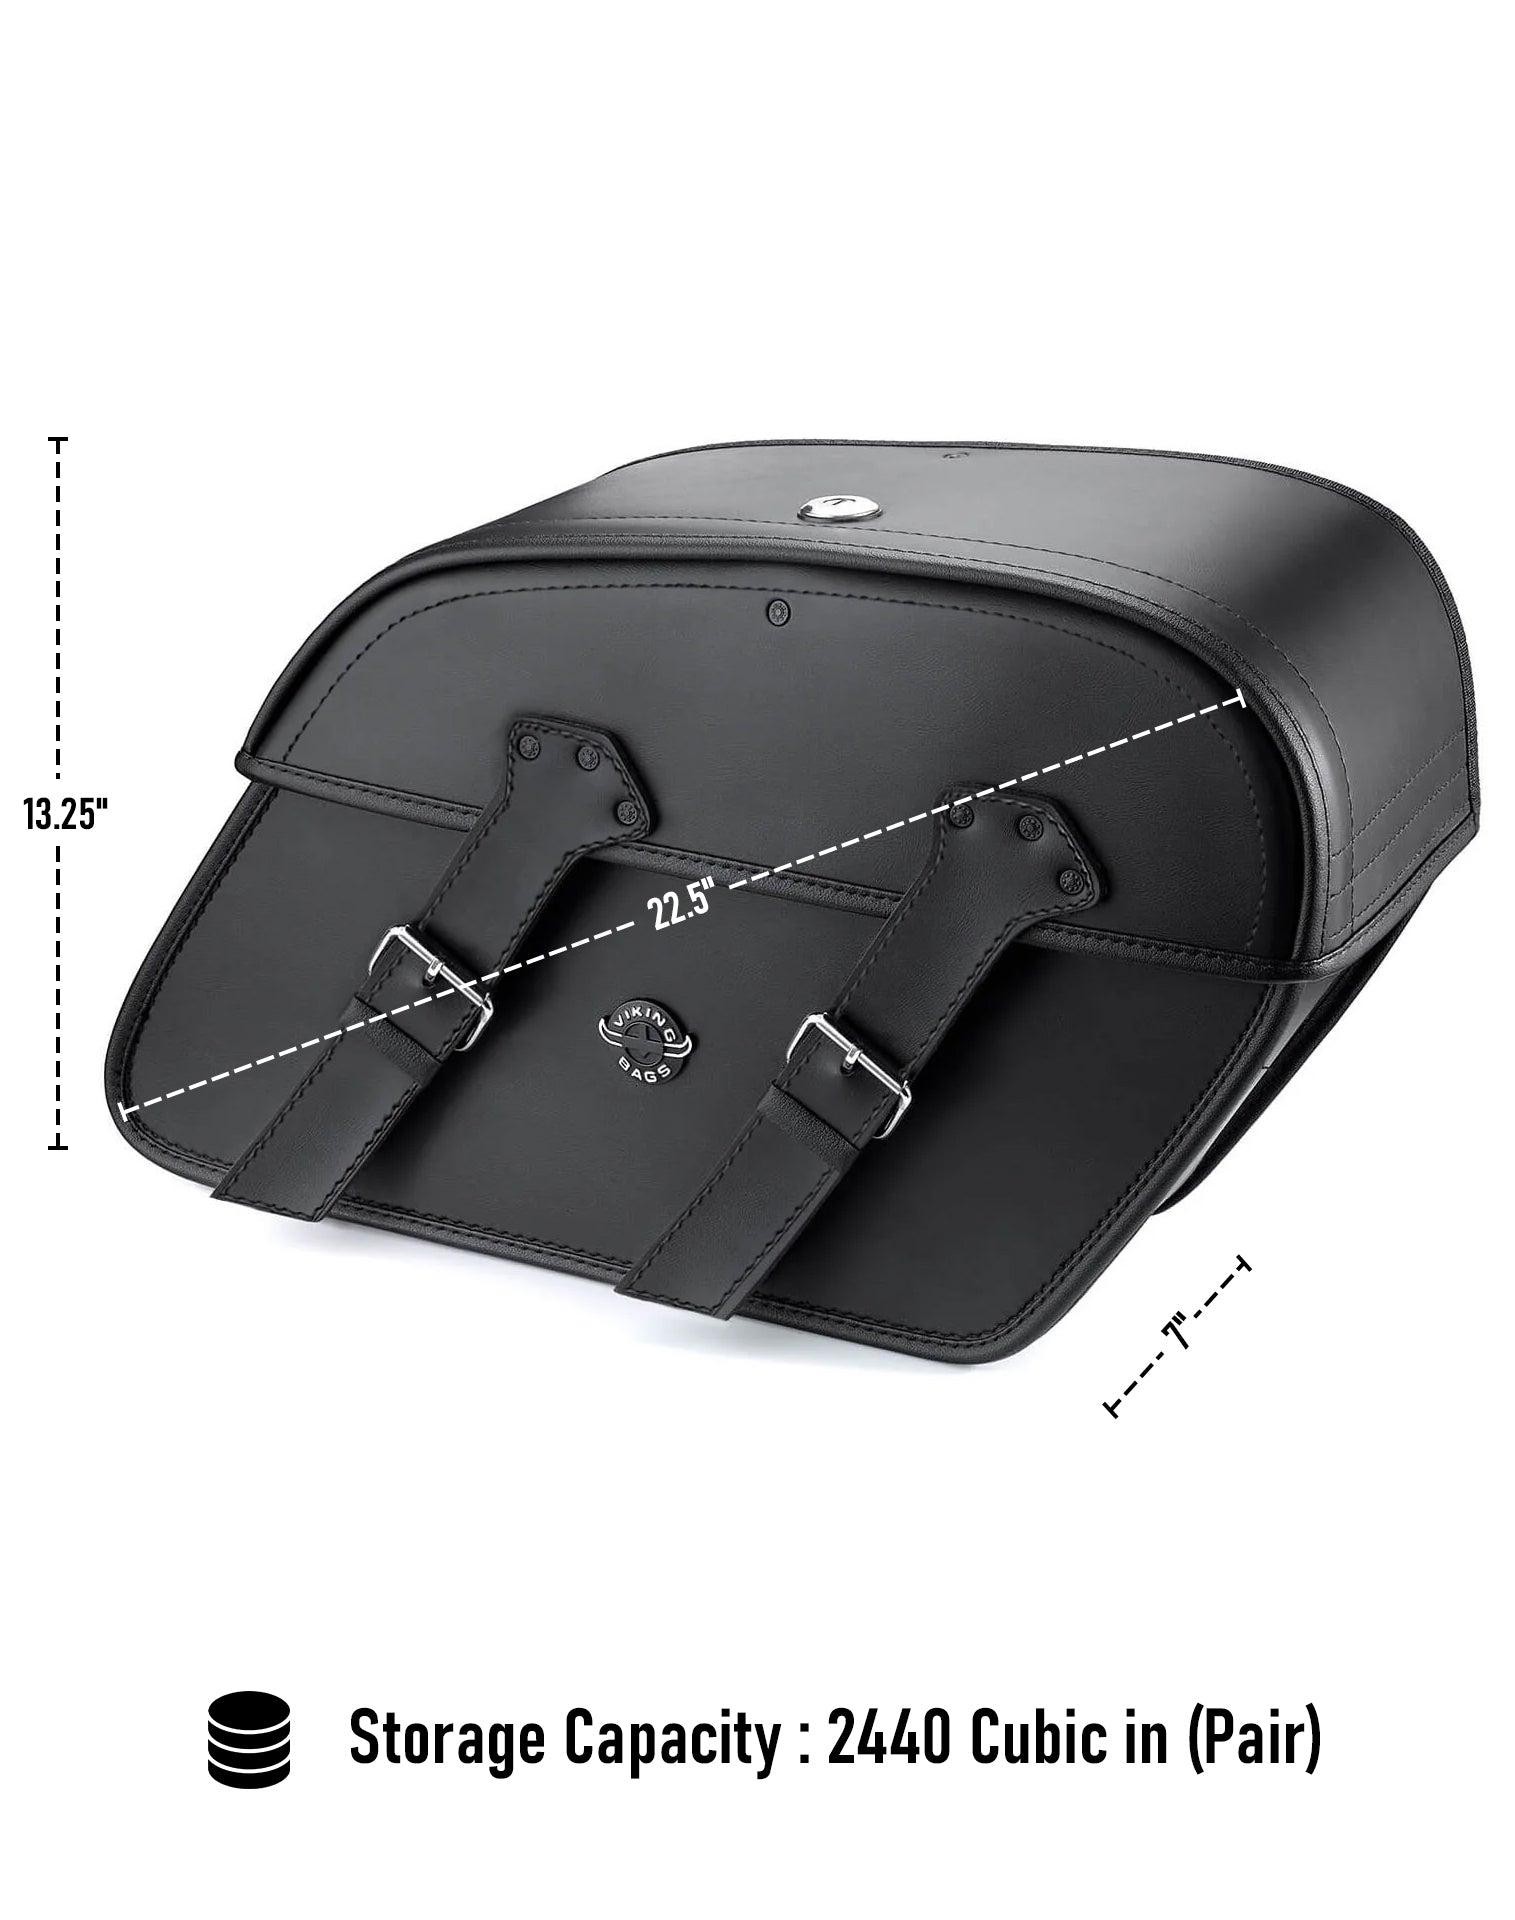 Viking Raven Extra Large Leather Motorcycle Saddlebags For Harley Softail Sport Glide Flsb Can Store Your Ridings Gears